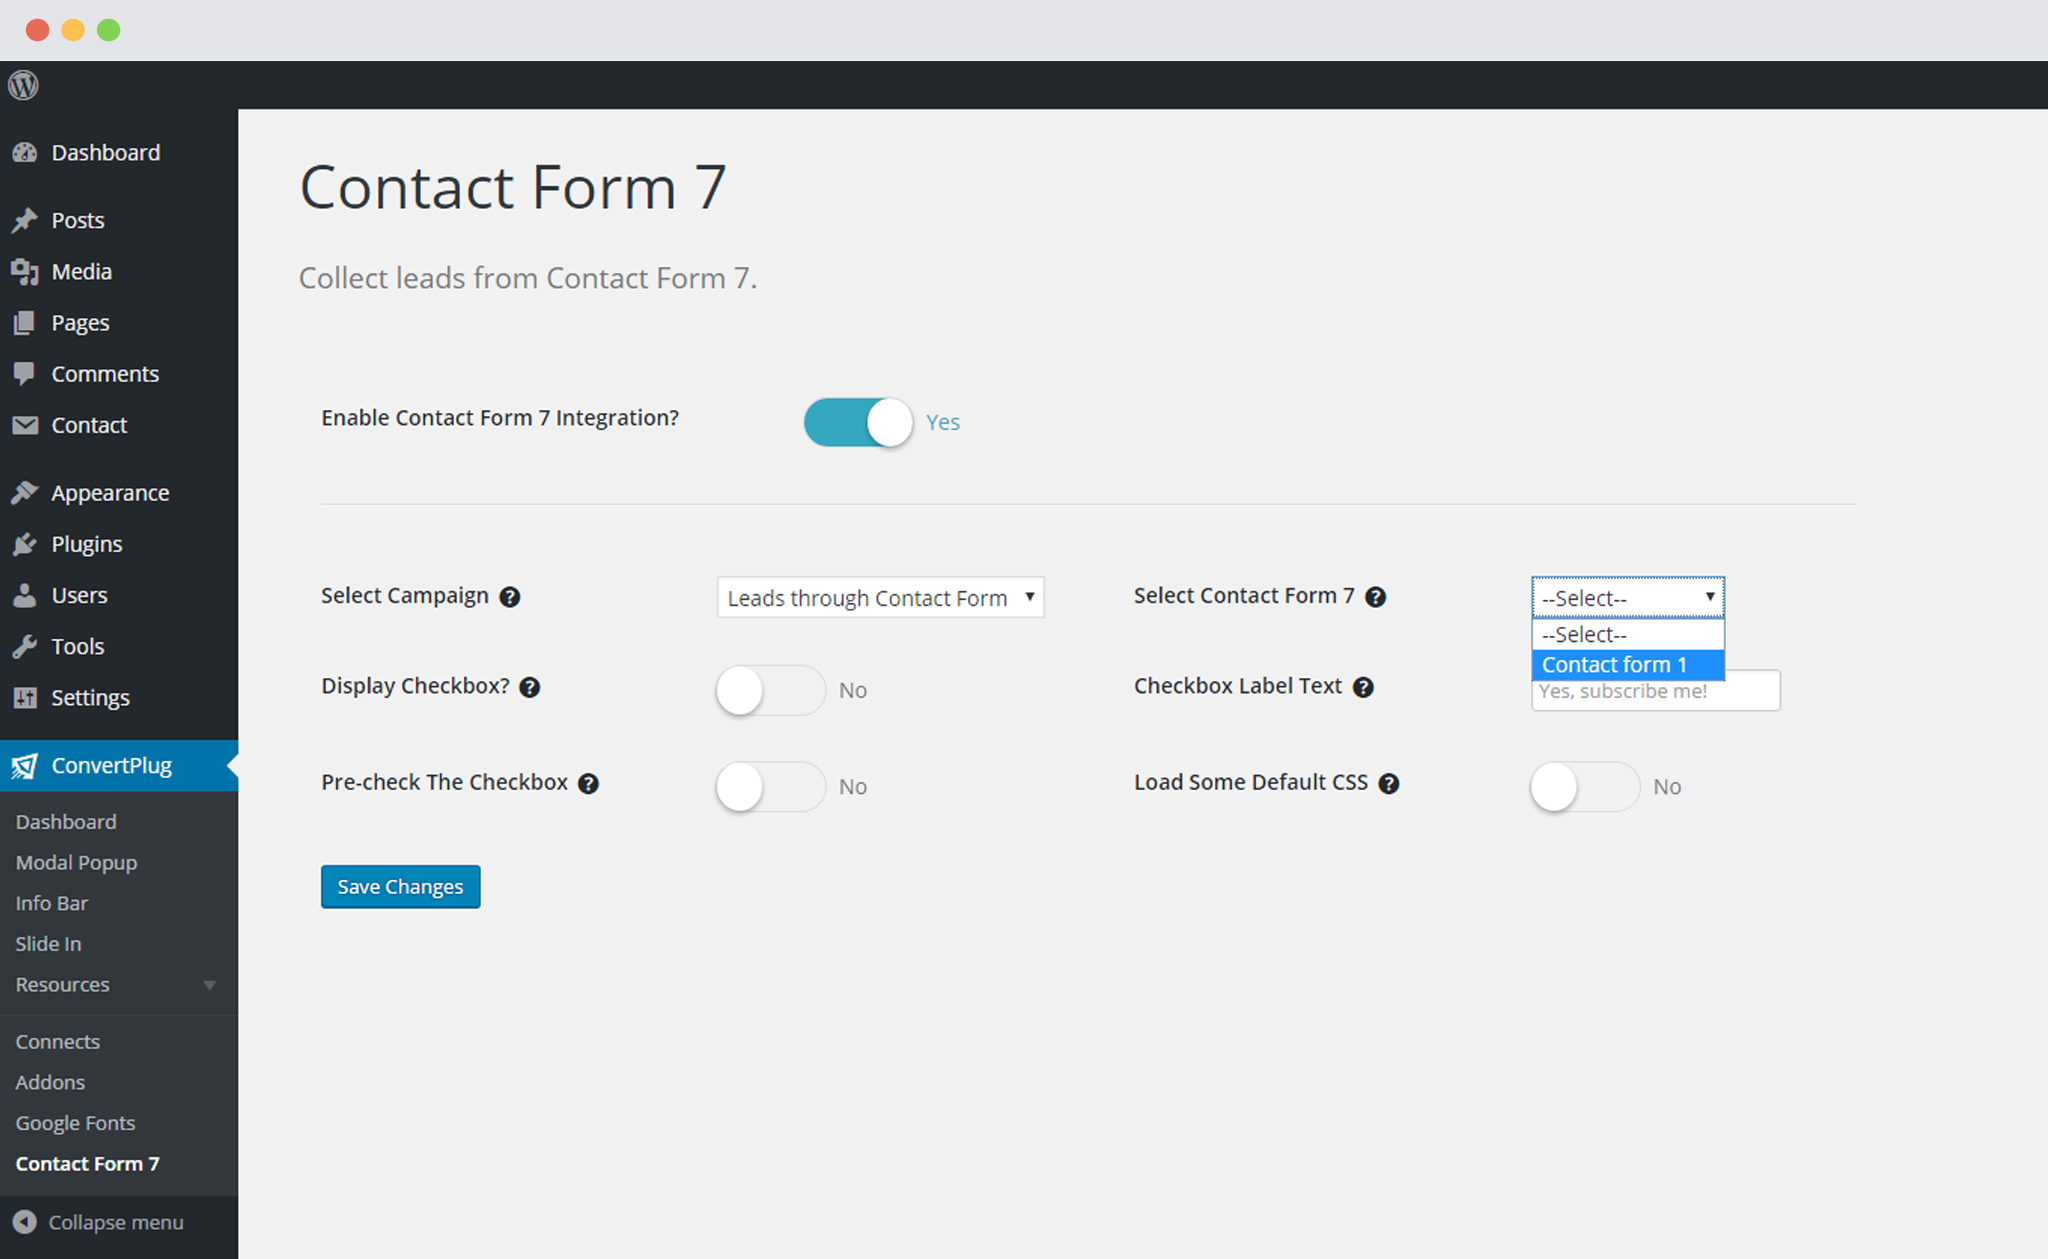 Select Contact Form